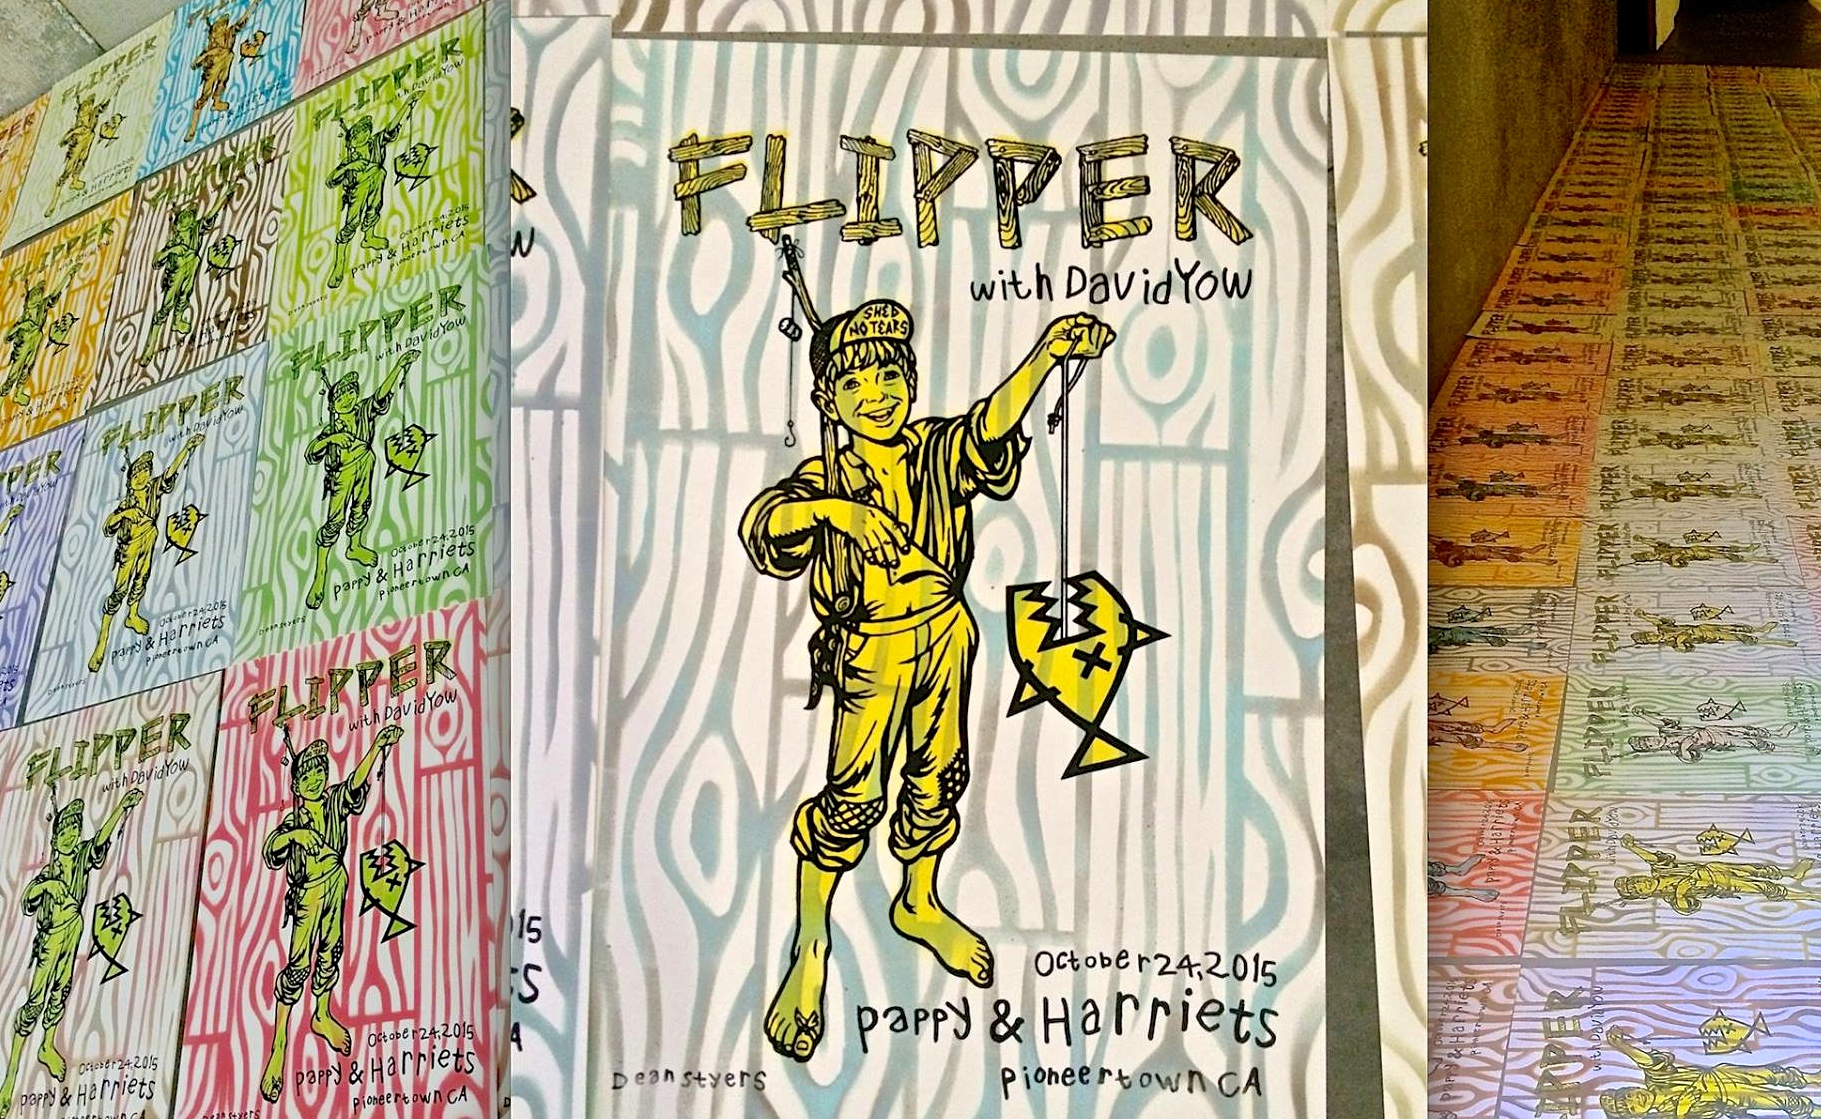 Flipper show poster. Screen print/stencil. Edition of 160, Hand screened/stenciled/signed & numbered (Available for purchase)